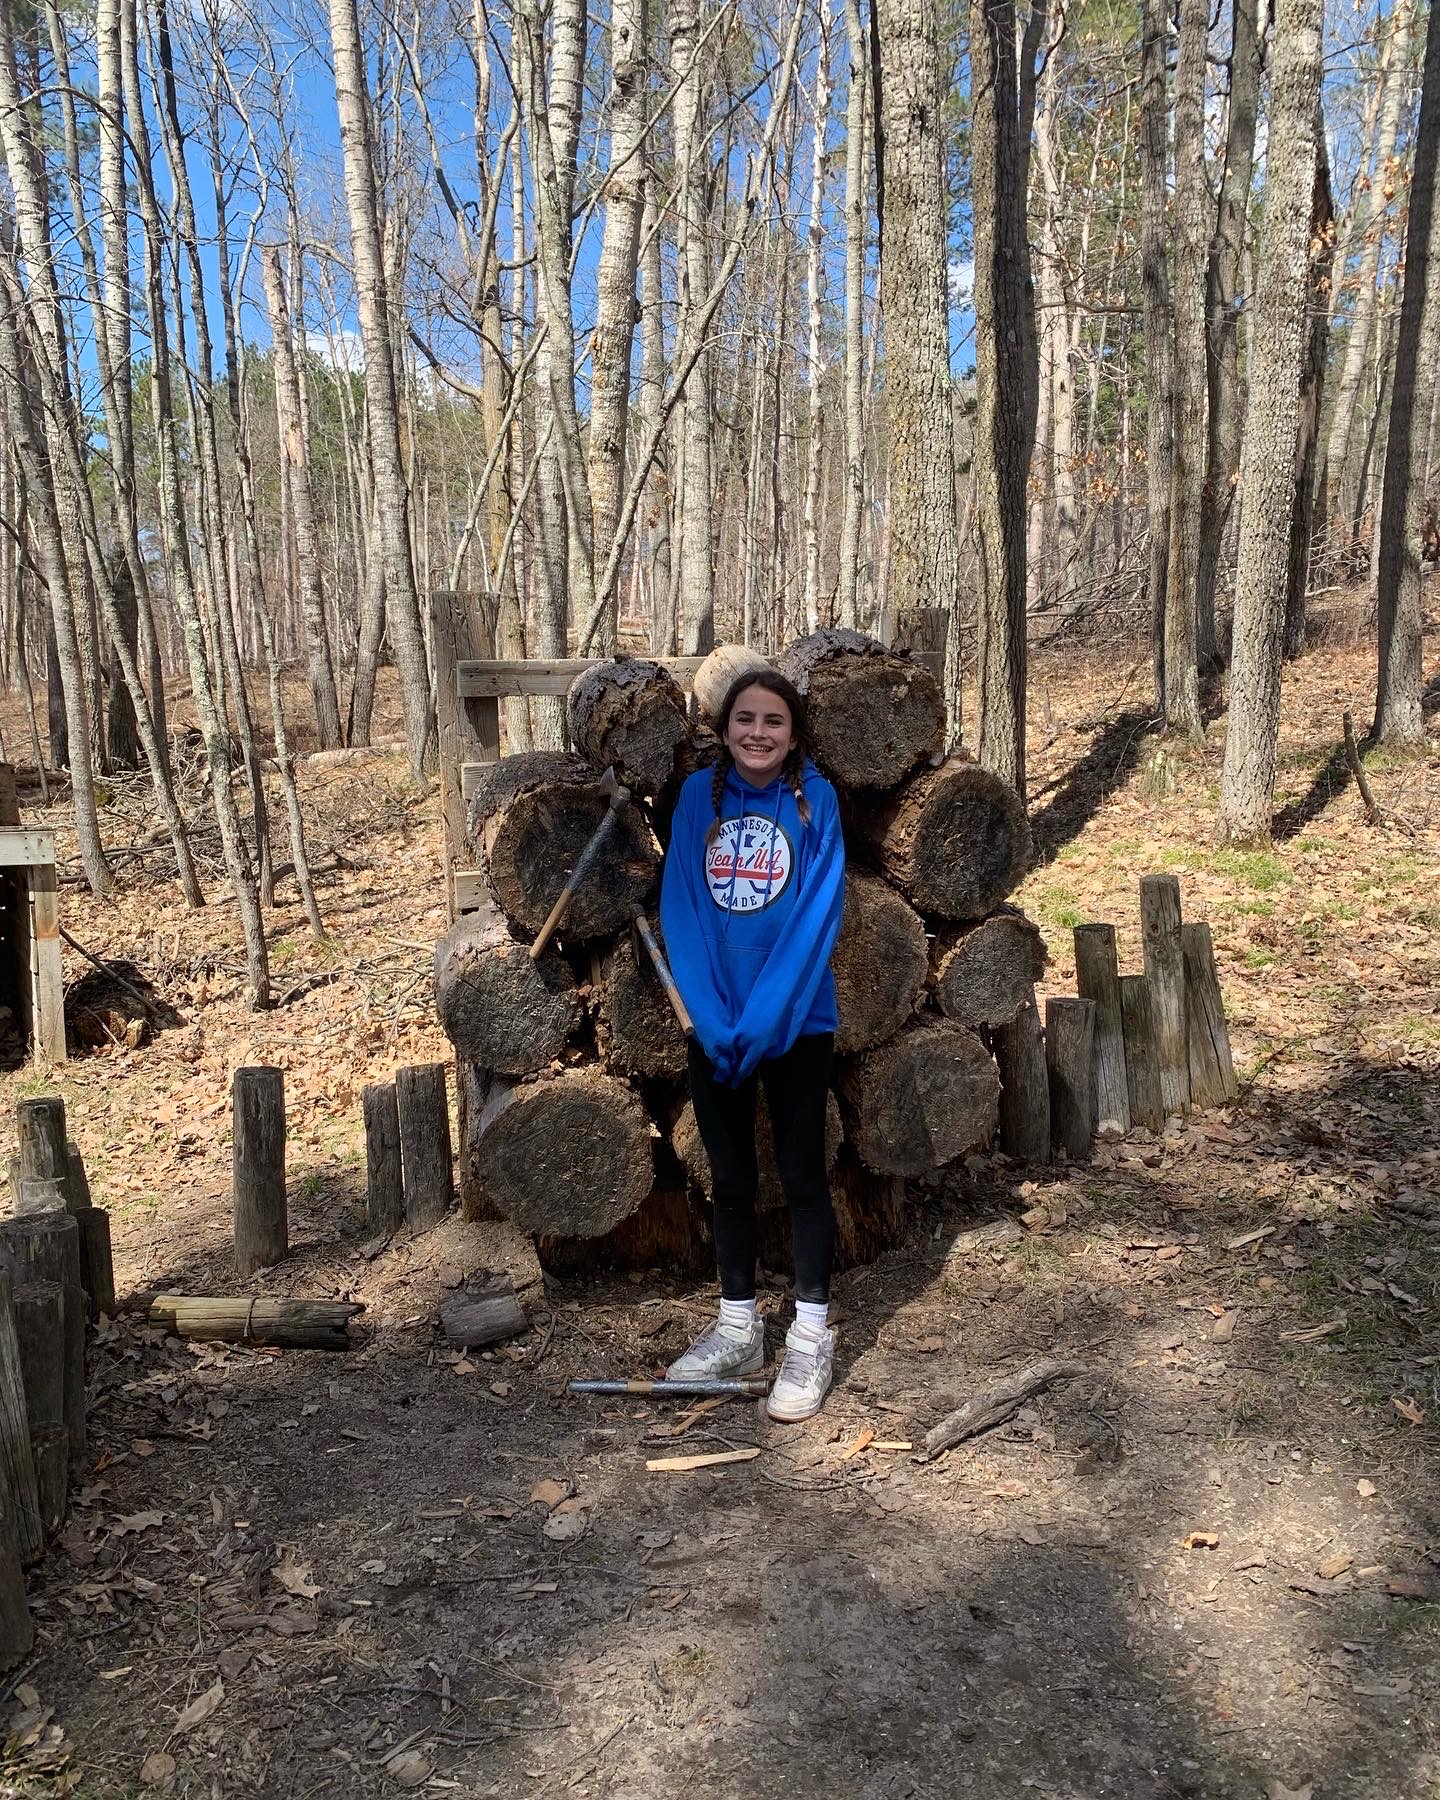 A girl in a blue sweatshirt stands in front of an axe throwing target with her axes stuck in 